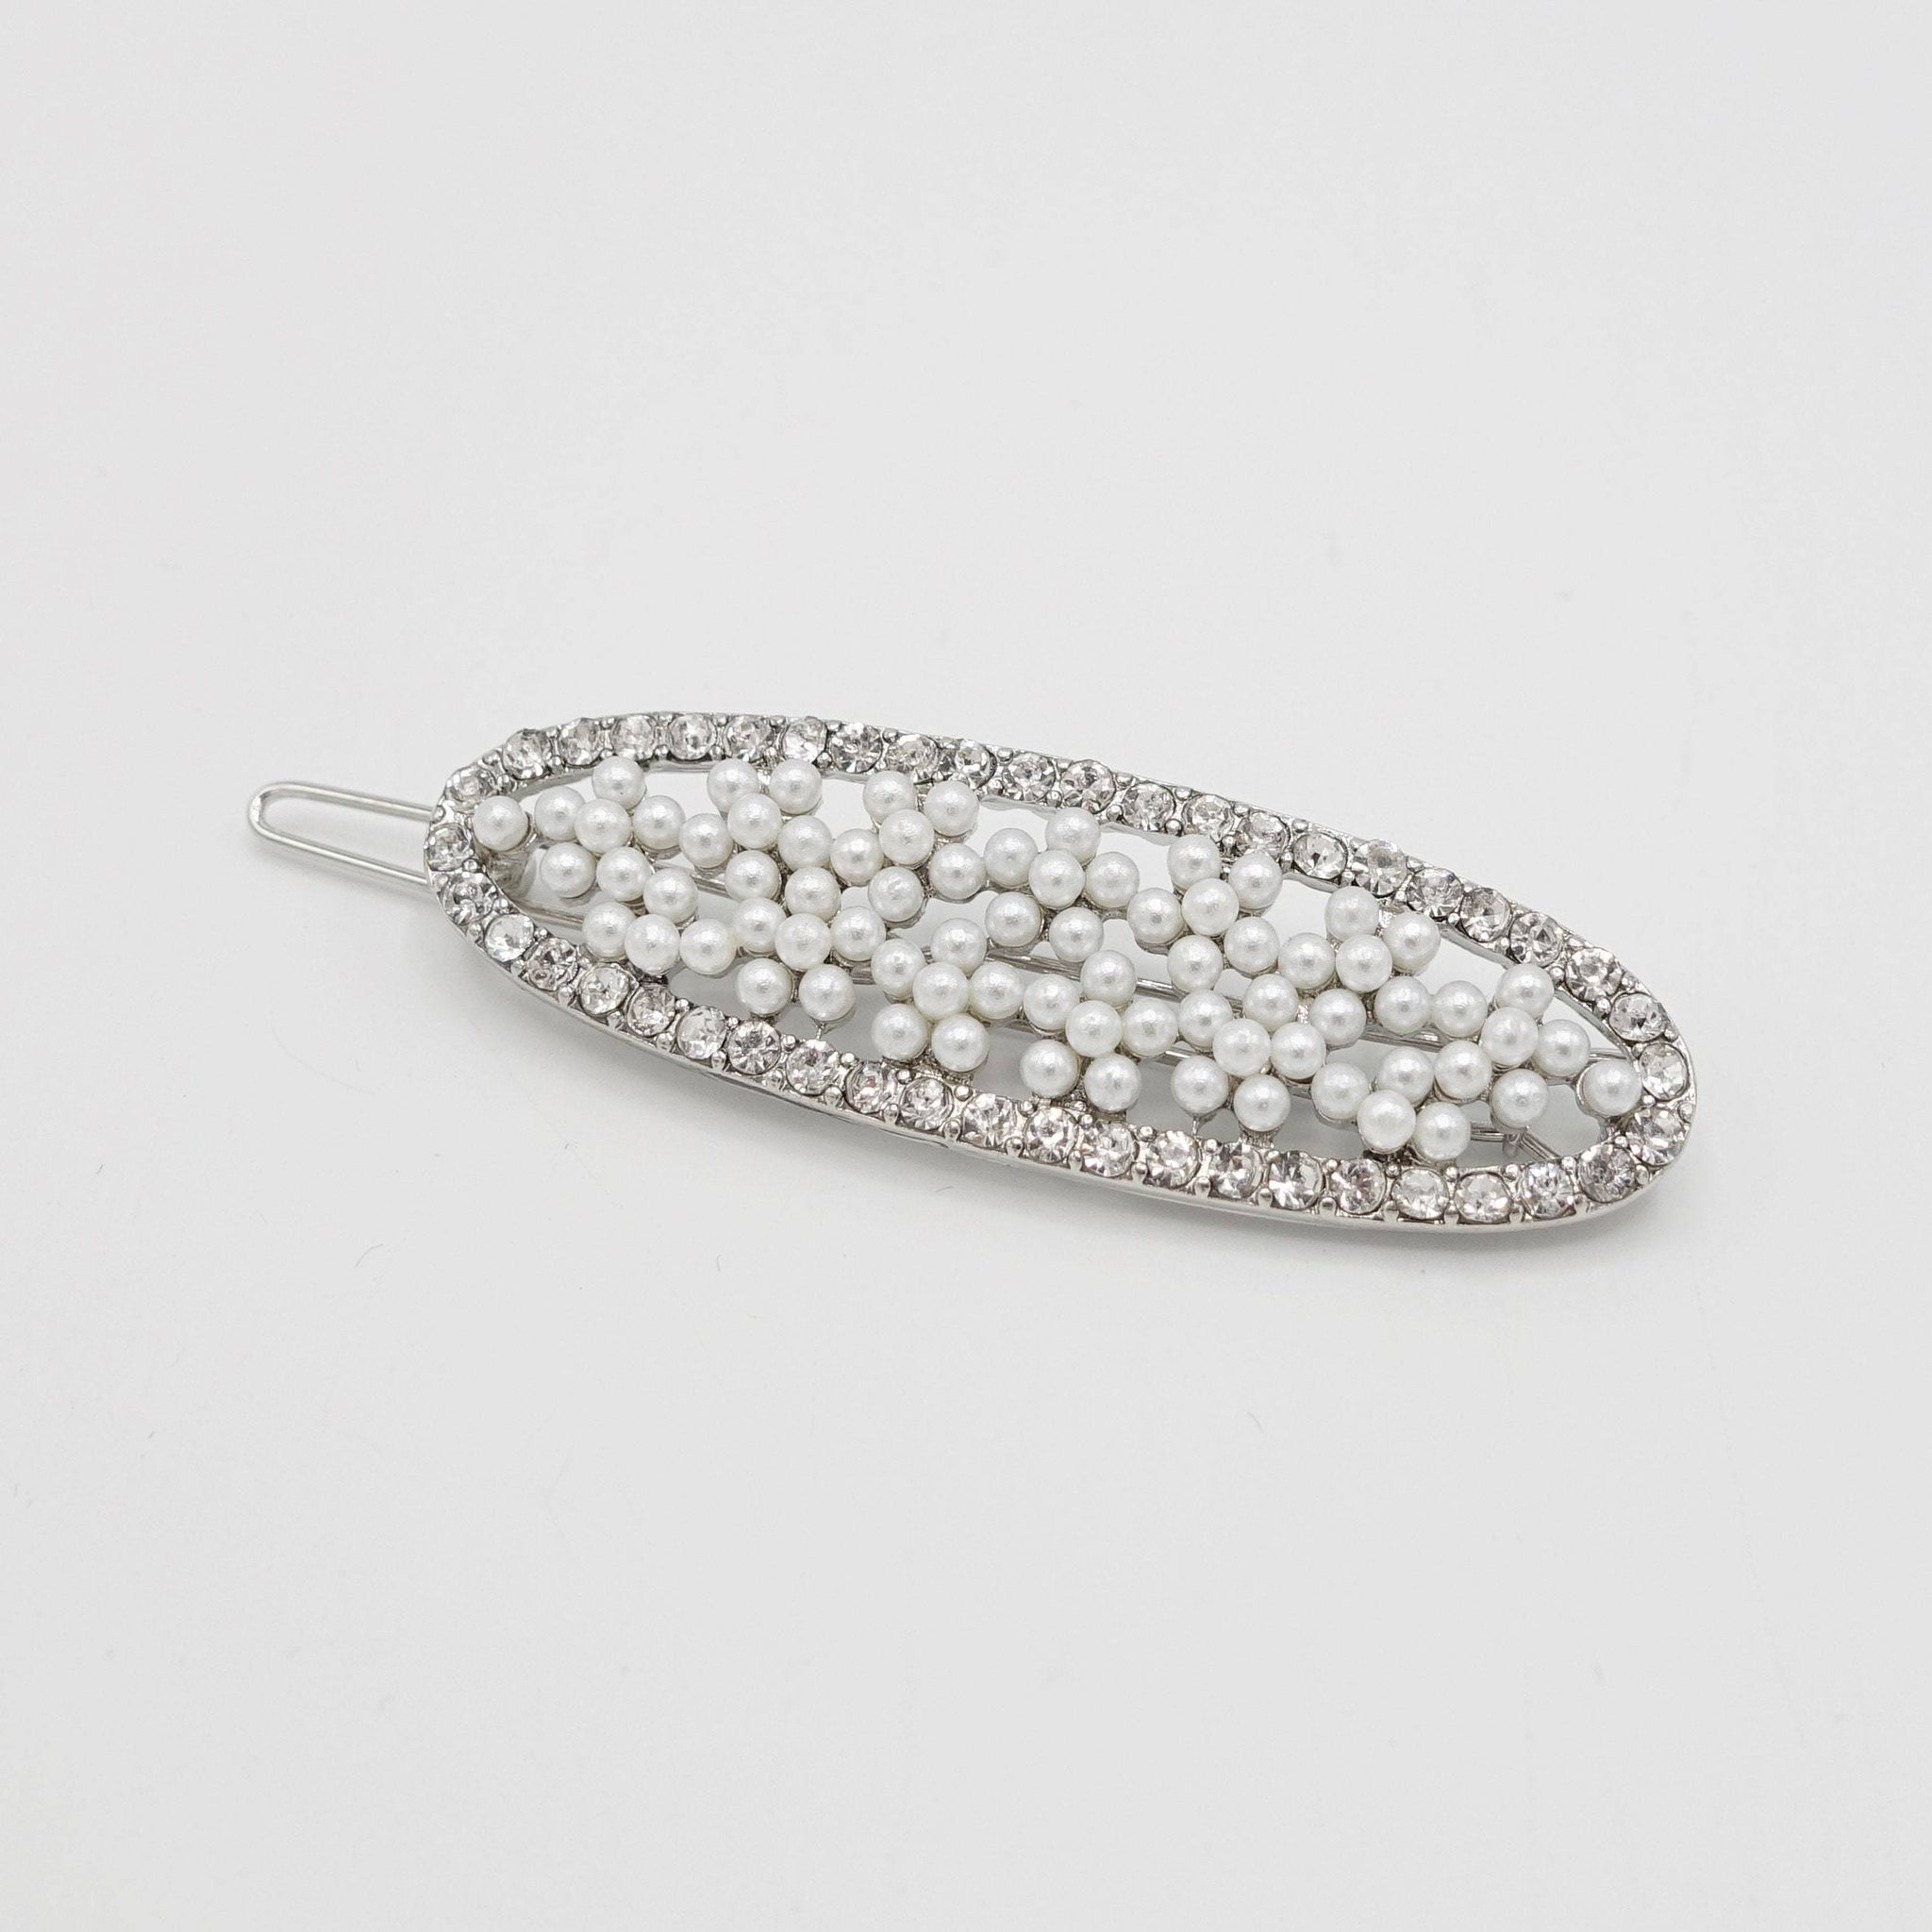 VeryShine Accessories oval pearl hair clip